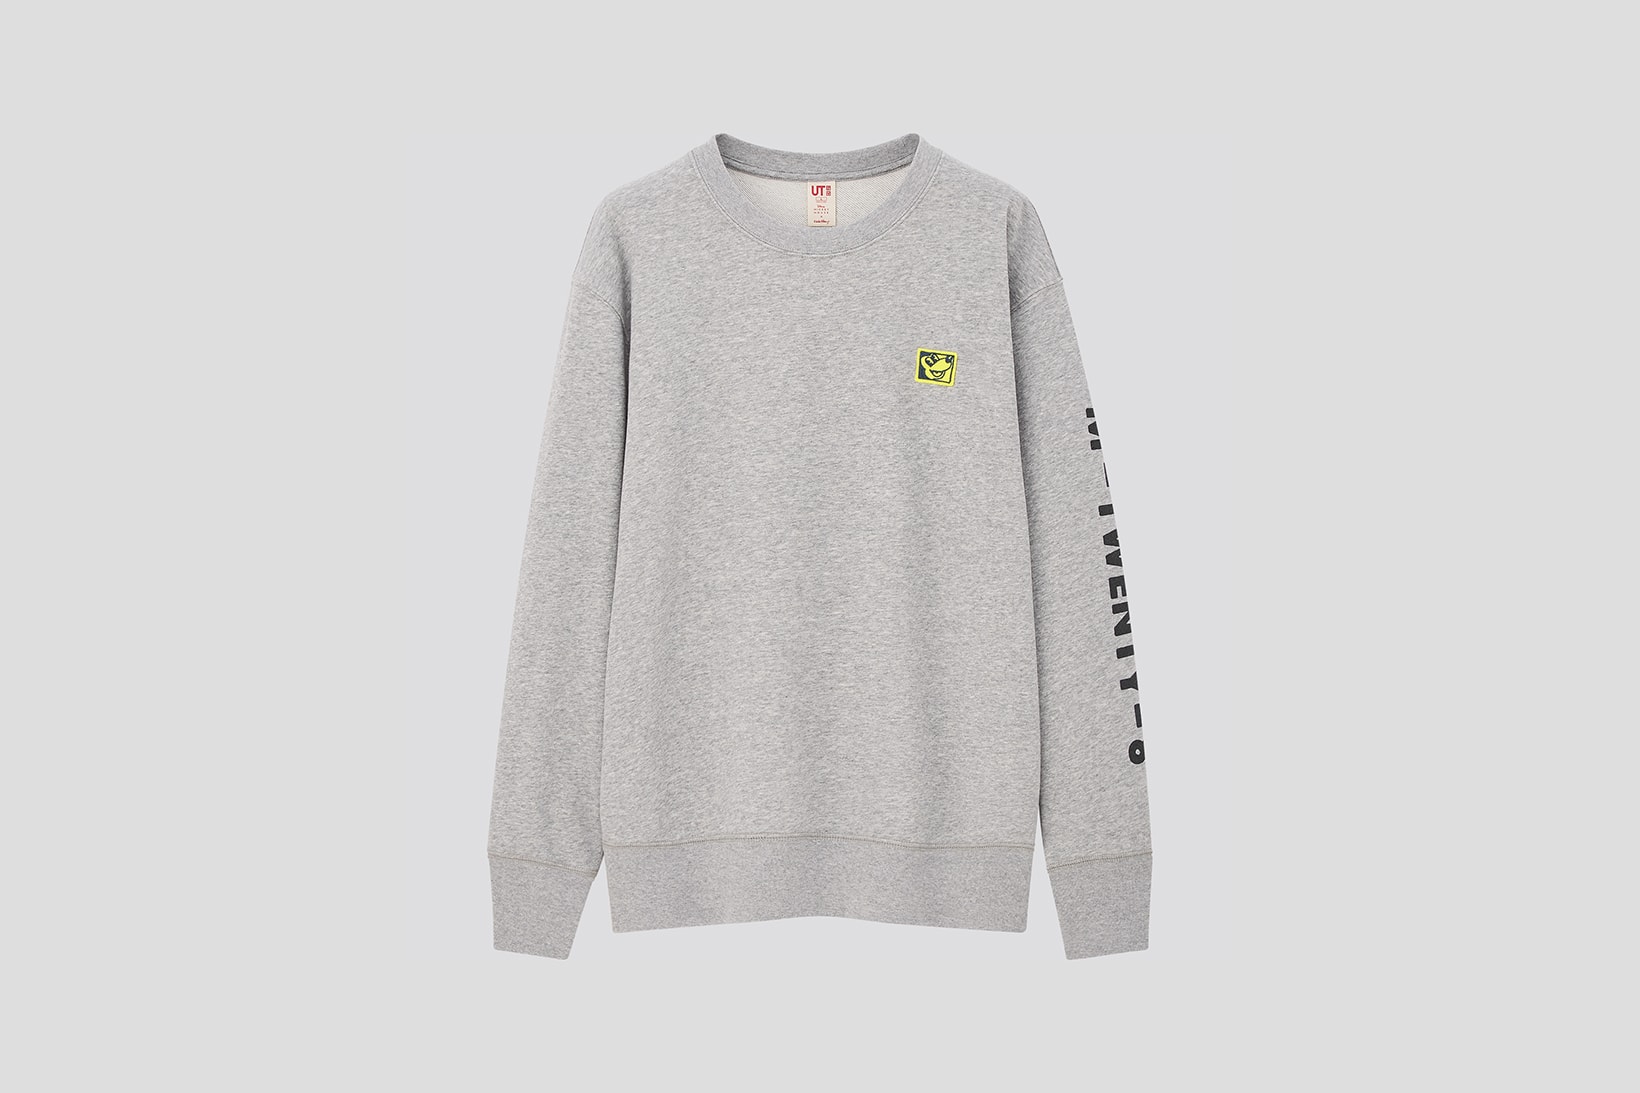 Disney Mickey Mouse x Keith Haring x UNIQLO UT Collaboration Collection Sweatshirt Sweater Black White